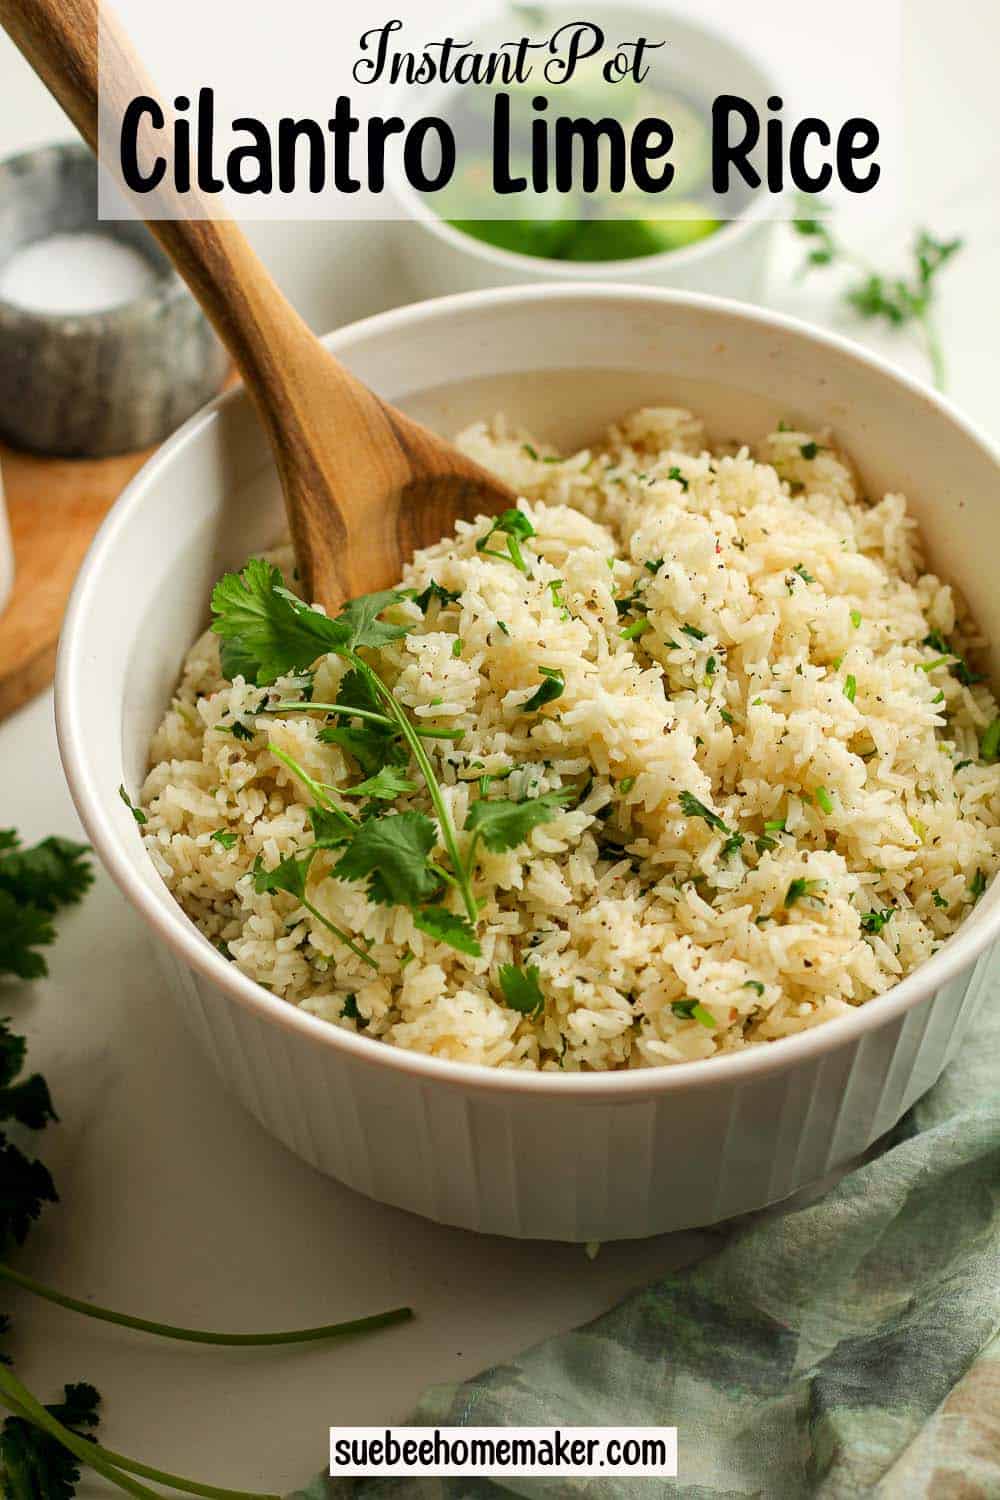 A bowl of cilantro lime rice with a wooden spoon.